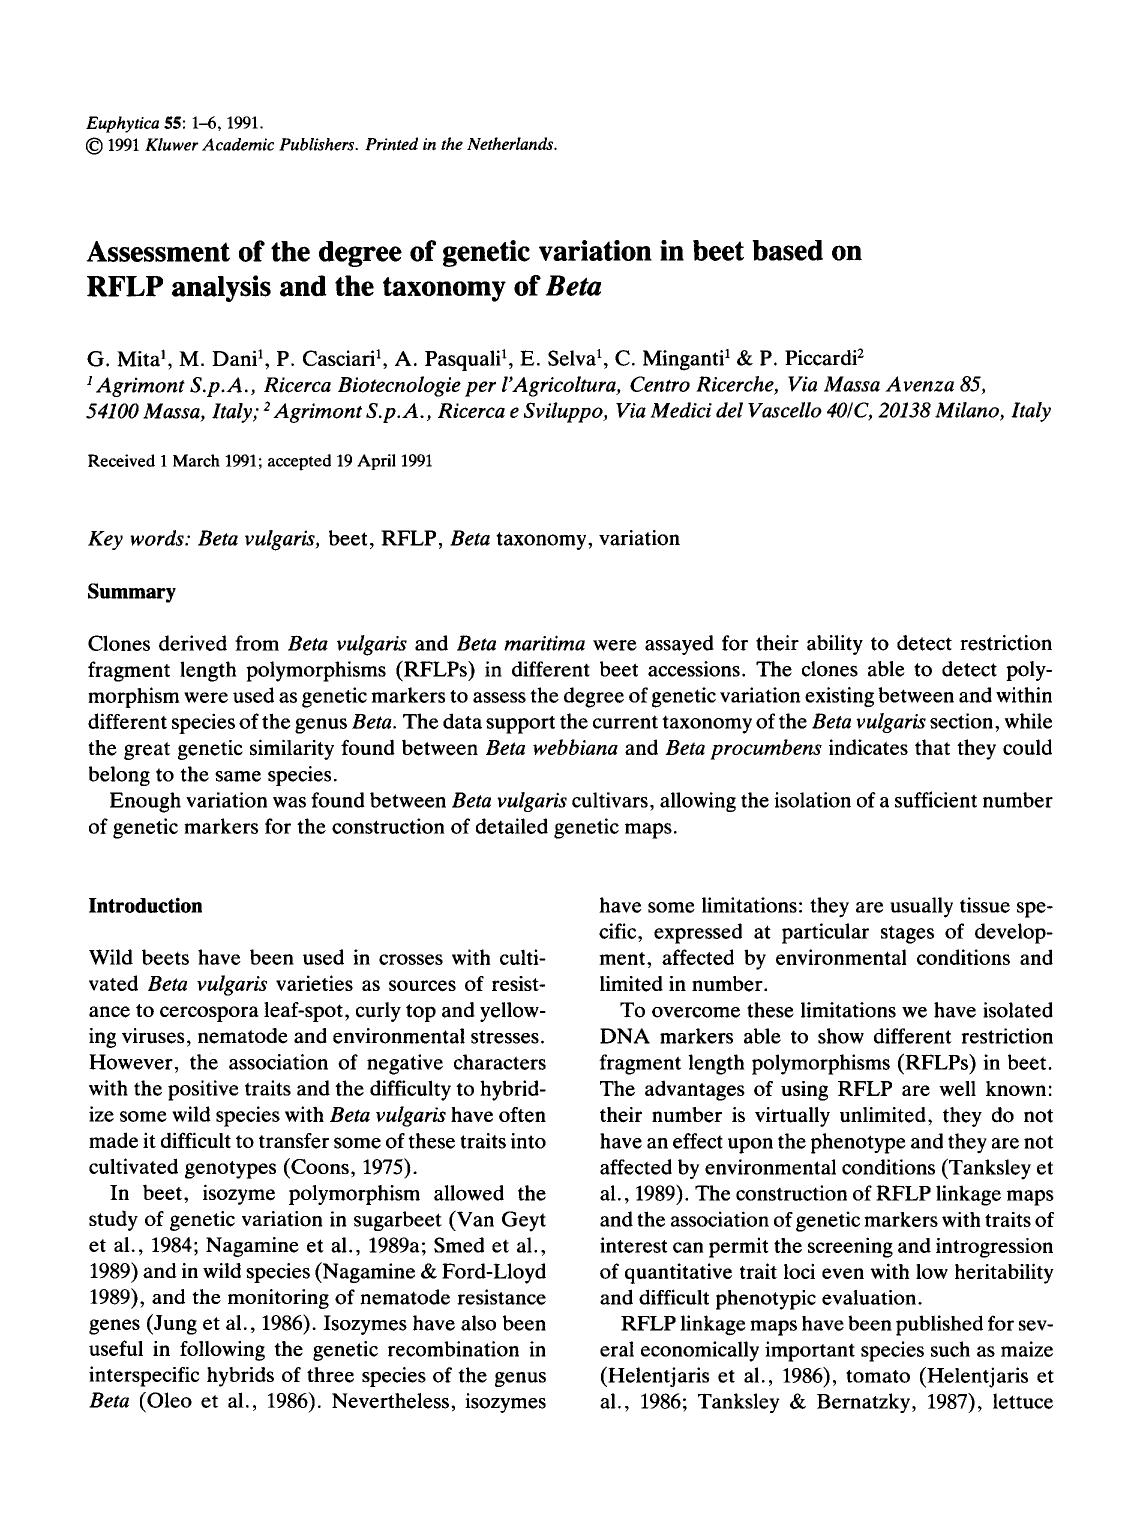 Assessment of the degree of genetic variation in beet based on RFLP analysis and the taxonomy of <Emphasis Type="Italic">Beta <Emphasis> by Unknown